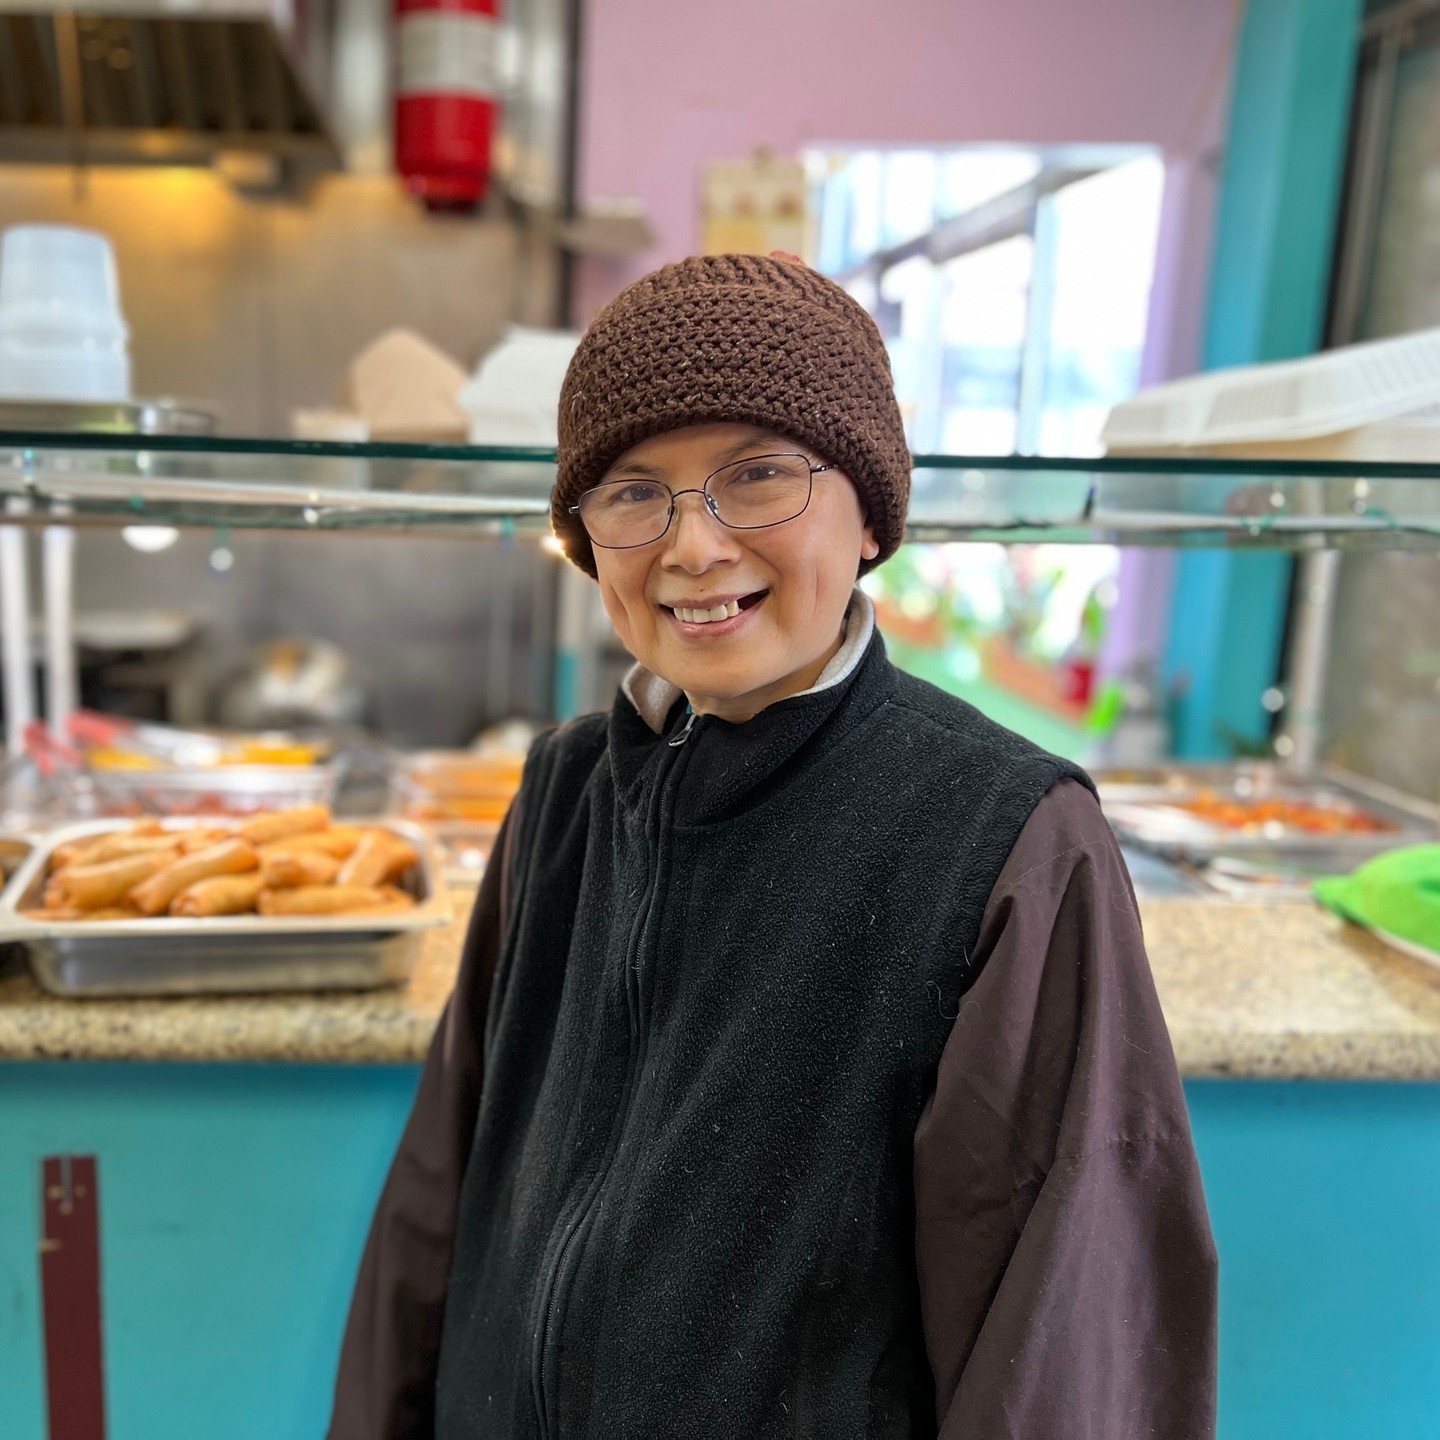 Kindness is everything 🥰⁠
⁠
Meet Tanya Nguyen, owner of @chuminhtofu in Seattle’s Chinatown-Internationalist District. ⁠
⁠
On July 9th from 1 PM - 6 PM you can find ChuMinh Tofu's 100% vegan banh mi sandwiches + egg rolls at @scidpda’s Outdoor Party in Canton Alley. ⁠
⁠
Enjoy a summer day in the C-ID with live music, dancing, and free refreshments (first come, first serve) from ChuMinh Tofu and Hood Famous Cafe + Bar.⁠
⁠
Drop a 🌱 in the comments below if you love Tanya's plant-based food and a ❤️ if you appreciate all that she does to give back to the community.⁠
⁠
#BeIntentional #SpendLikeItMatters